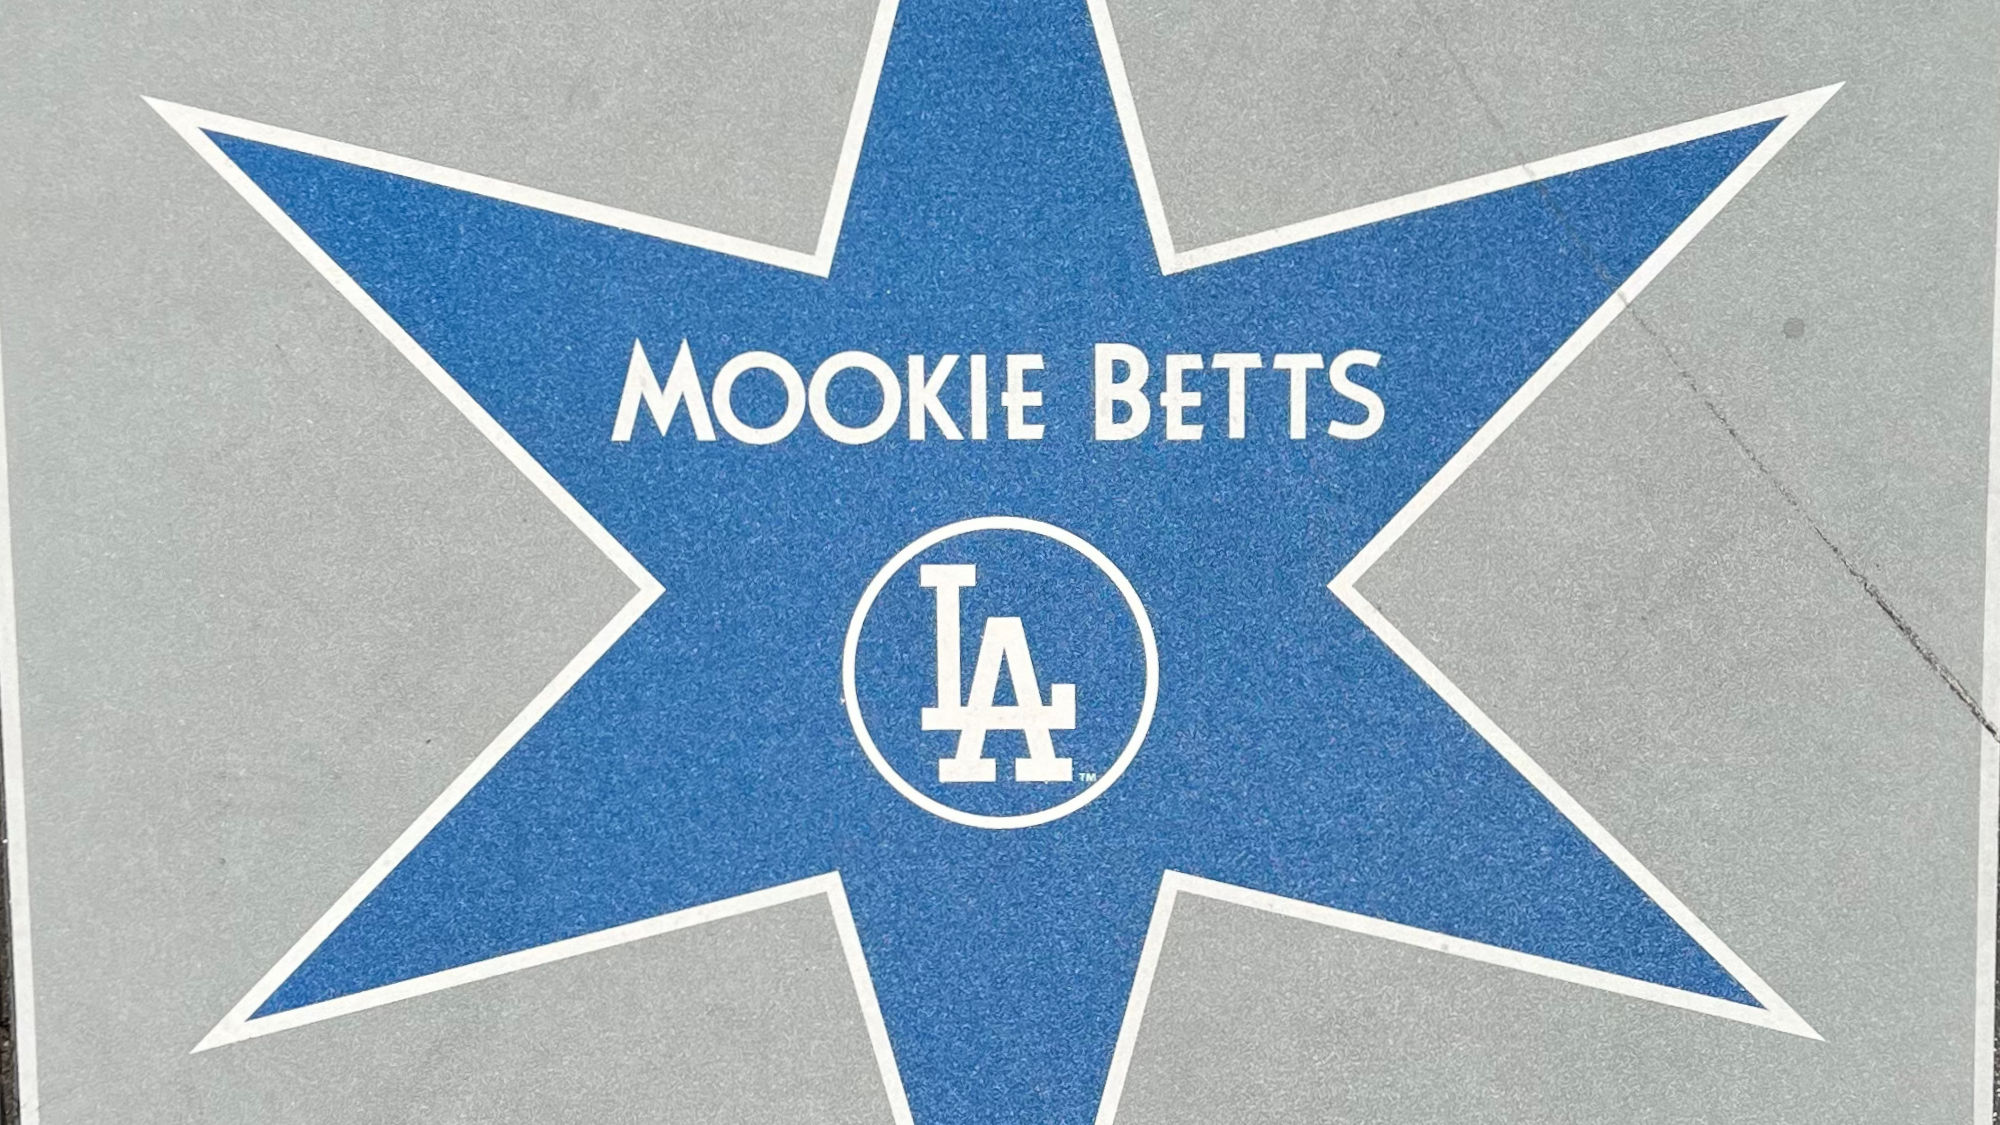 All Star Walk of Fame Mookie Betts